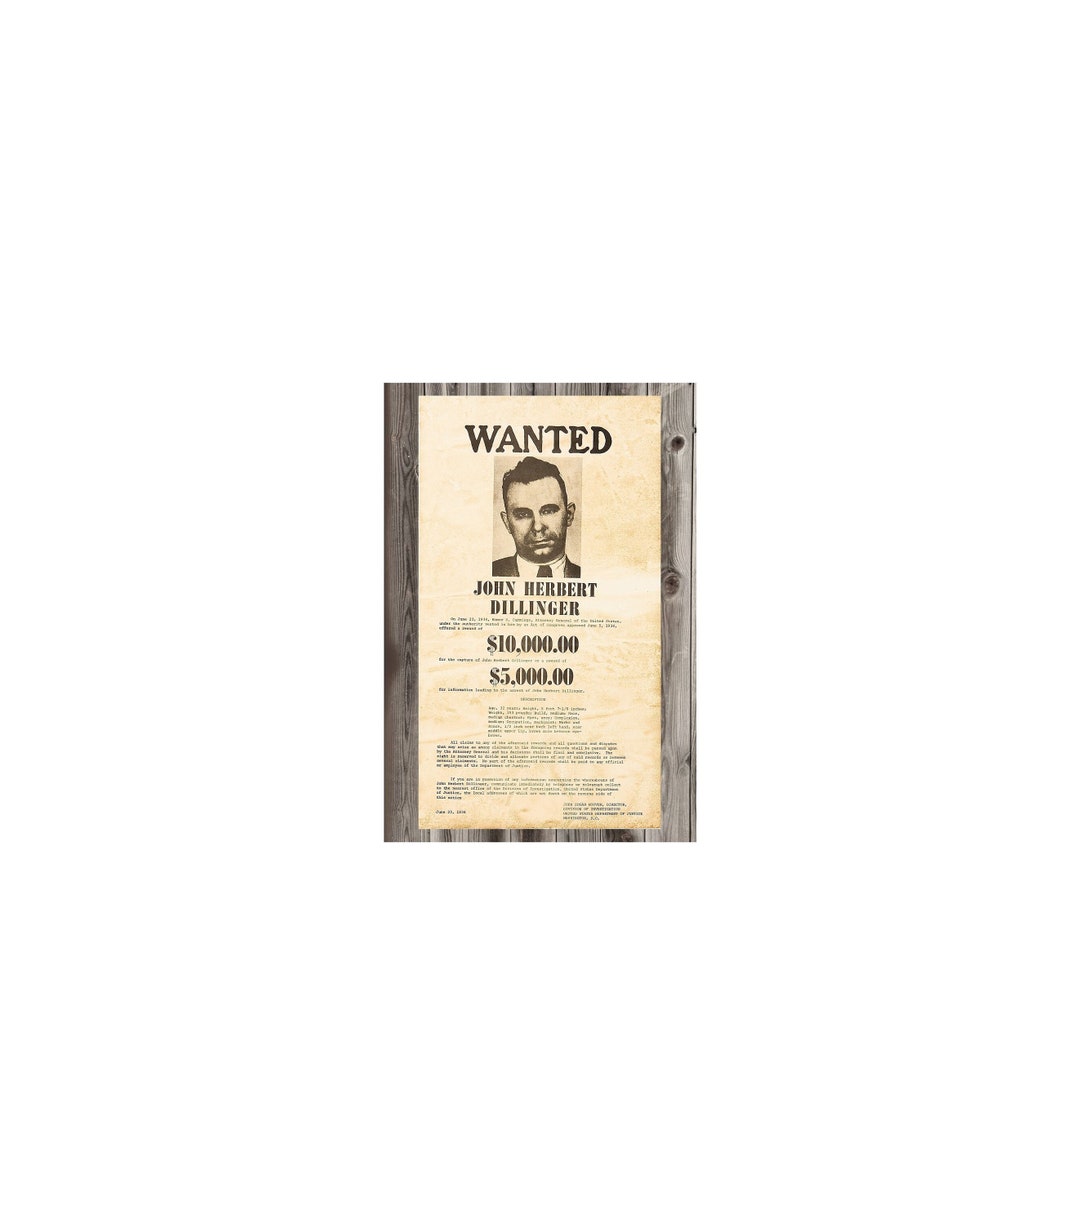 16 X 24 Inch Poster Wanted John Dillinger Wanted Poster Retro Print Art ...